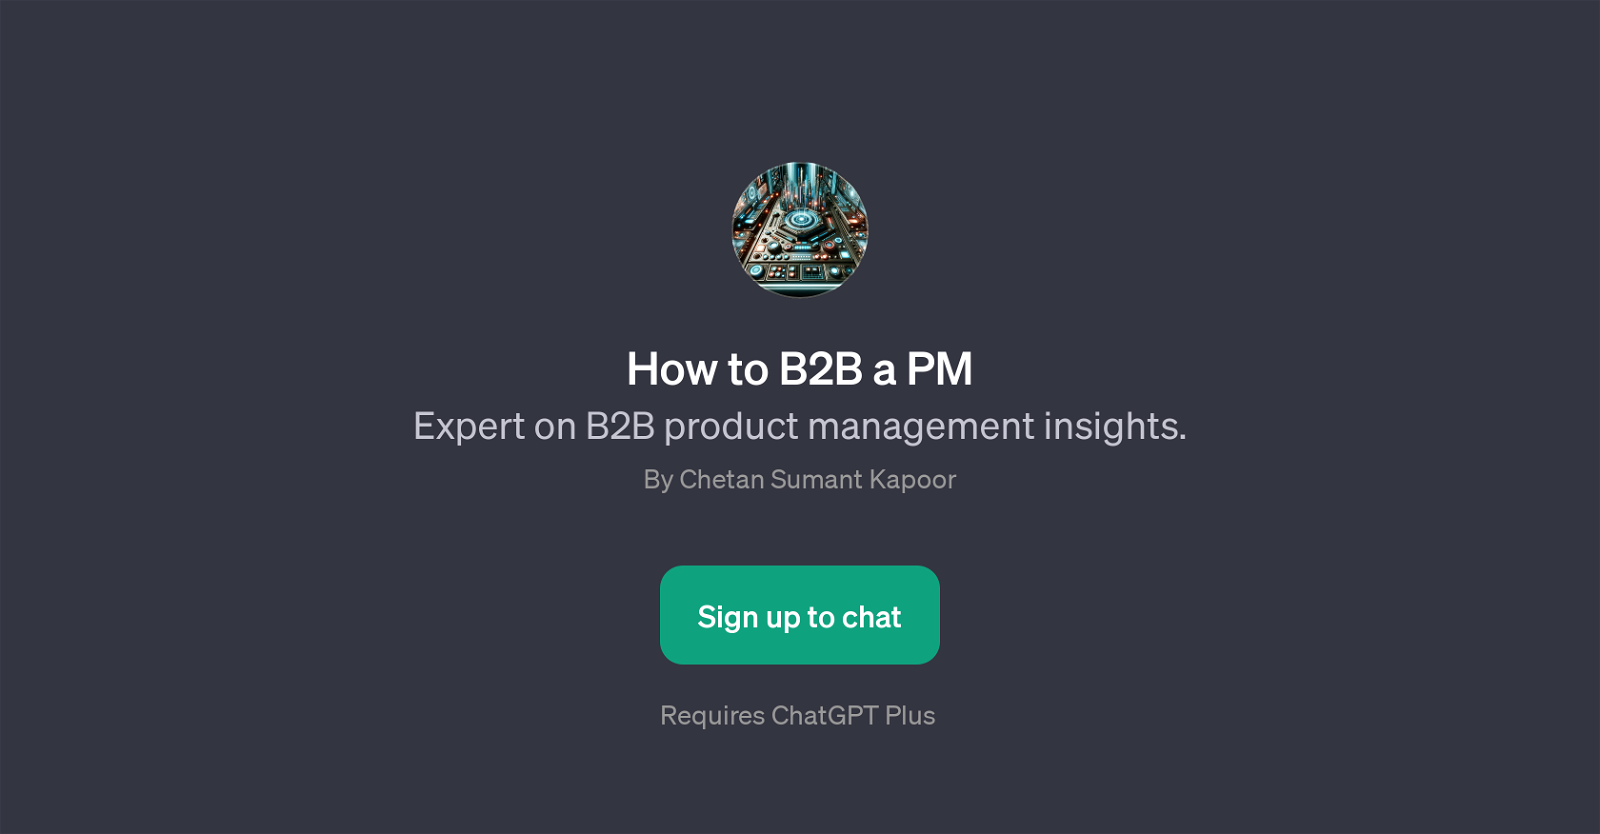 How to B2B a PM website